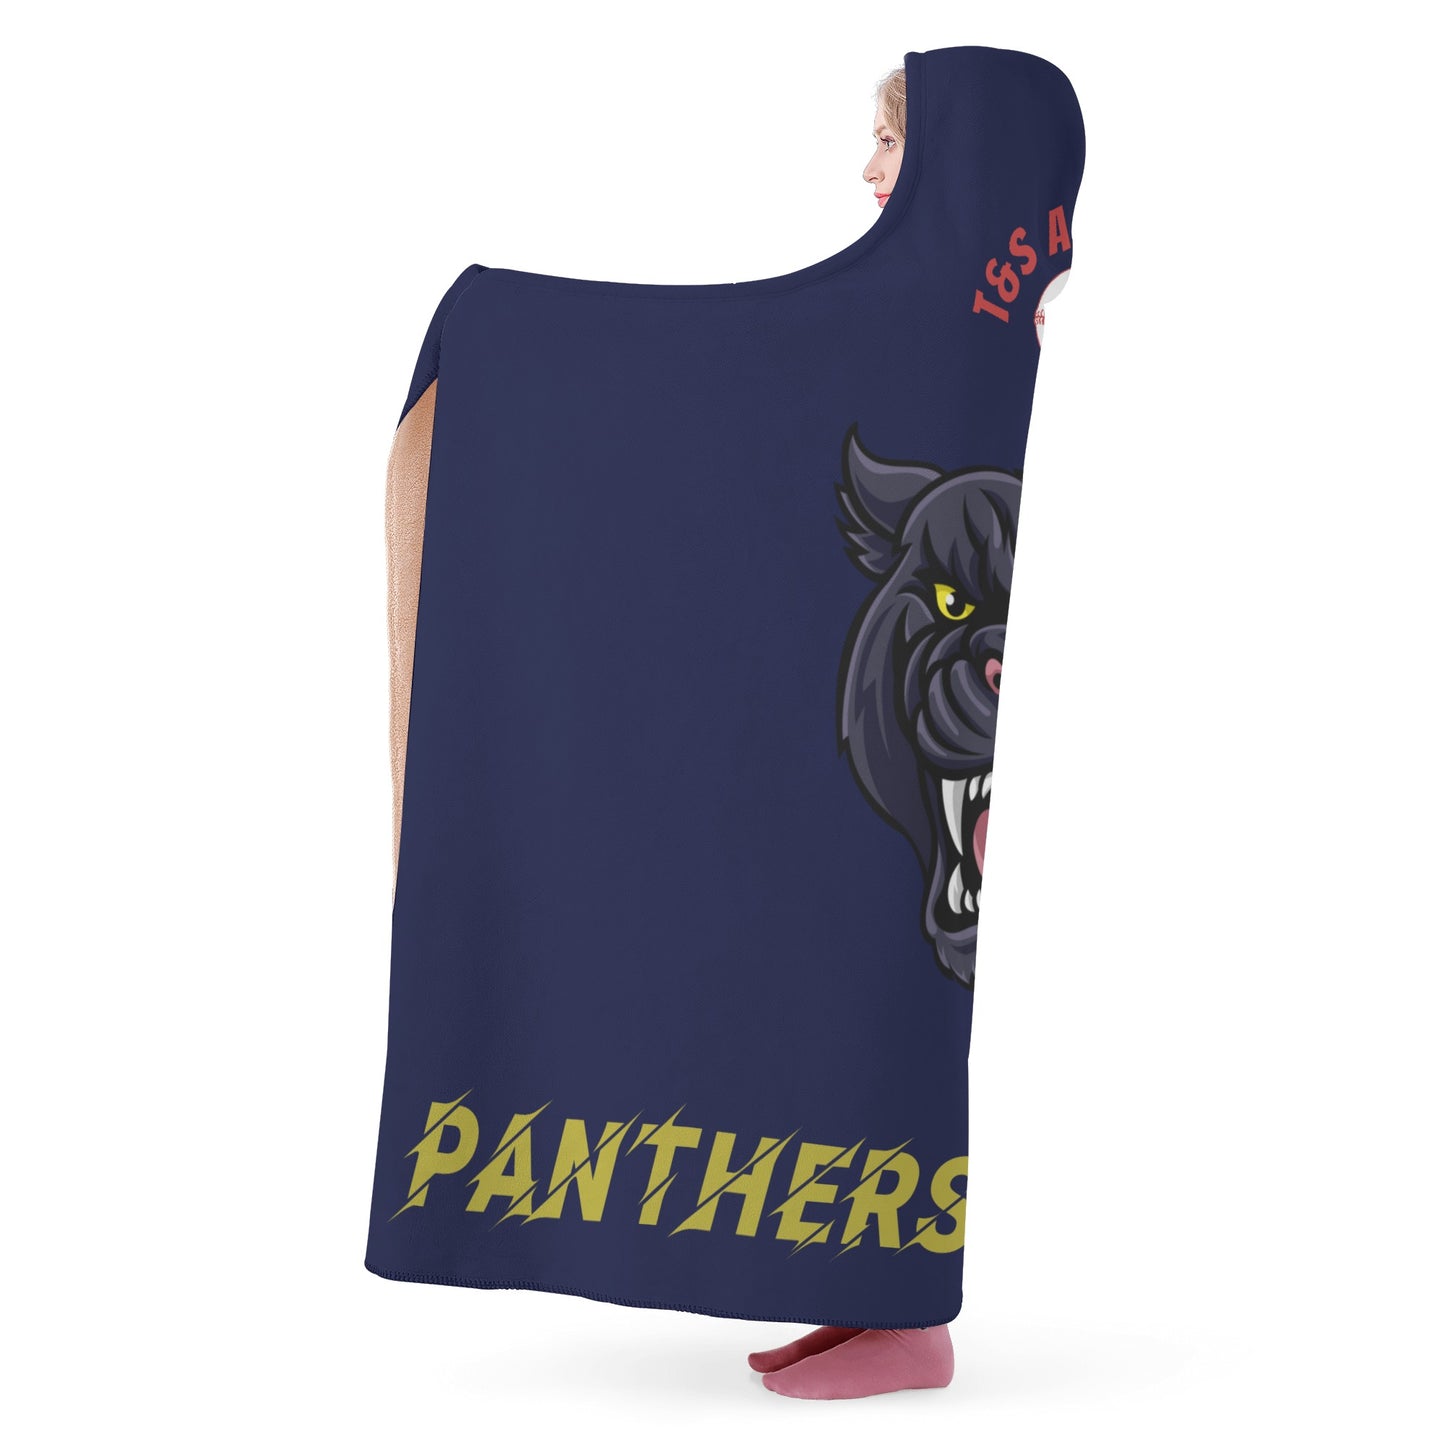 Panthers Softball Hooded Blanket